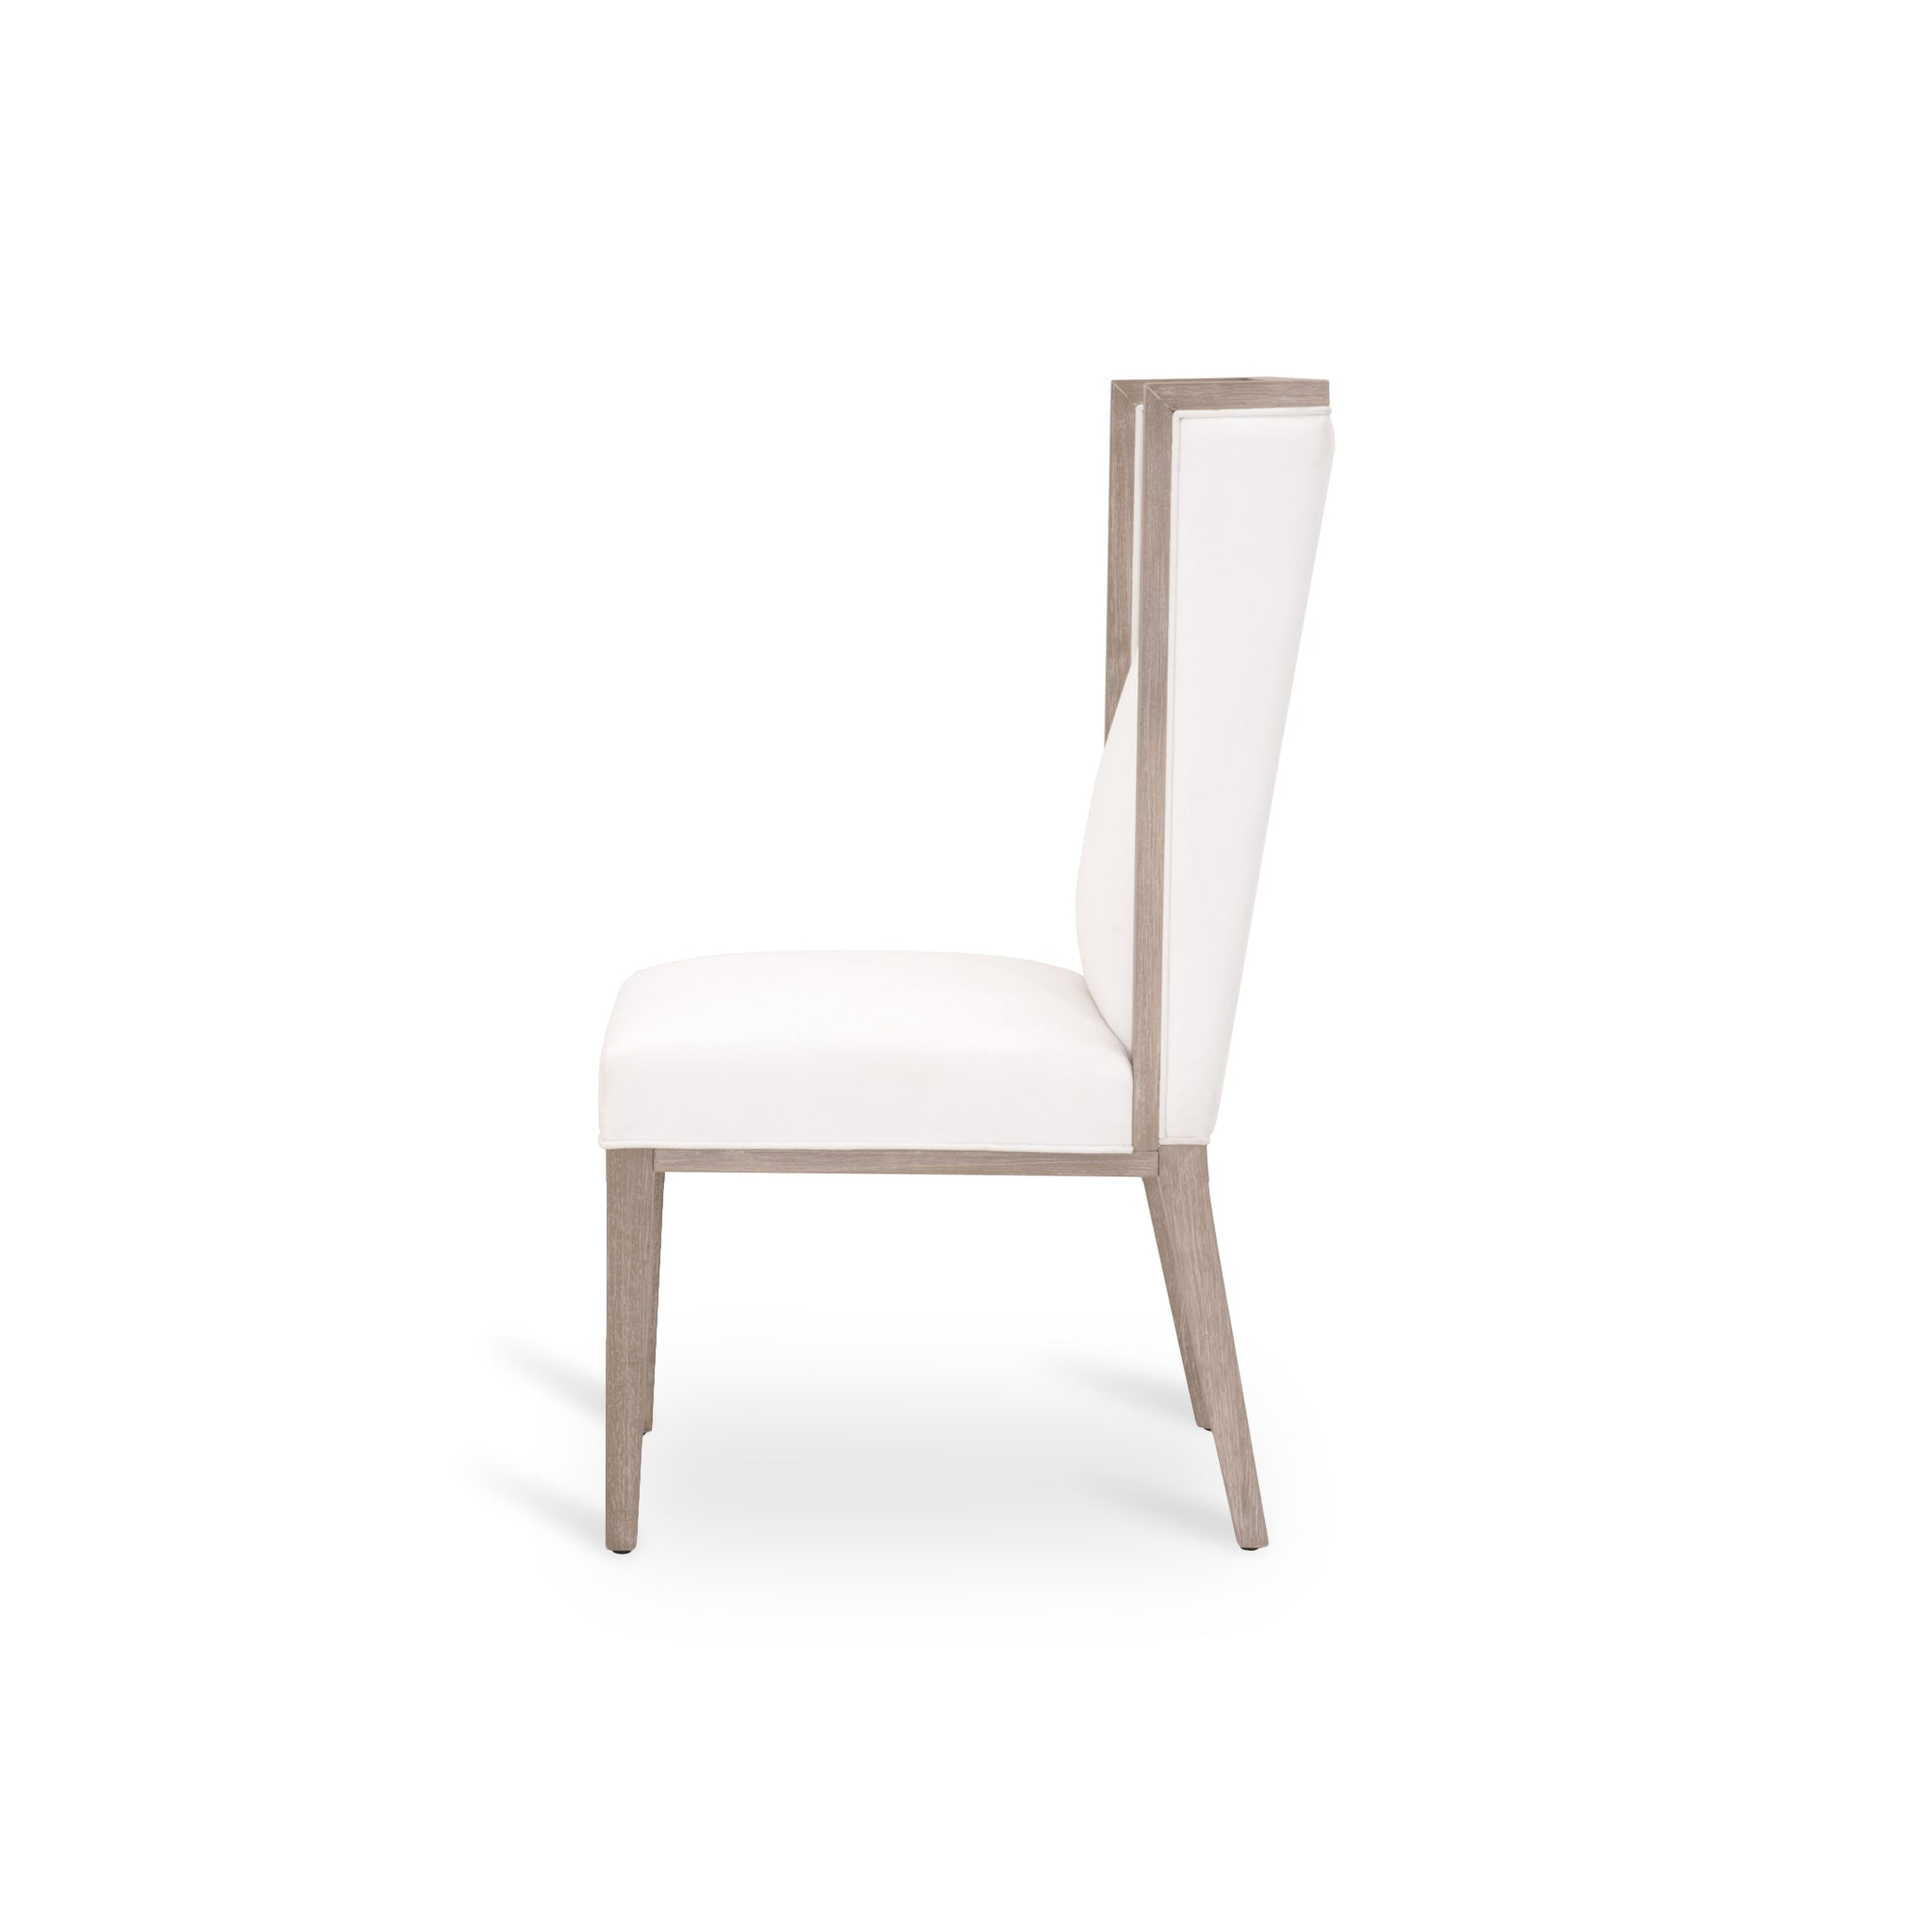 Ebikon Wing Chair - Set of 2